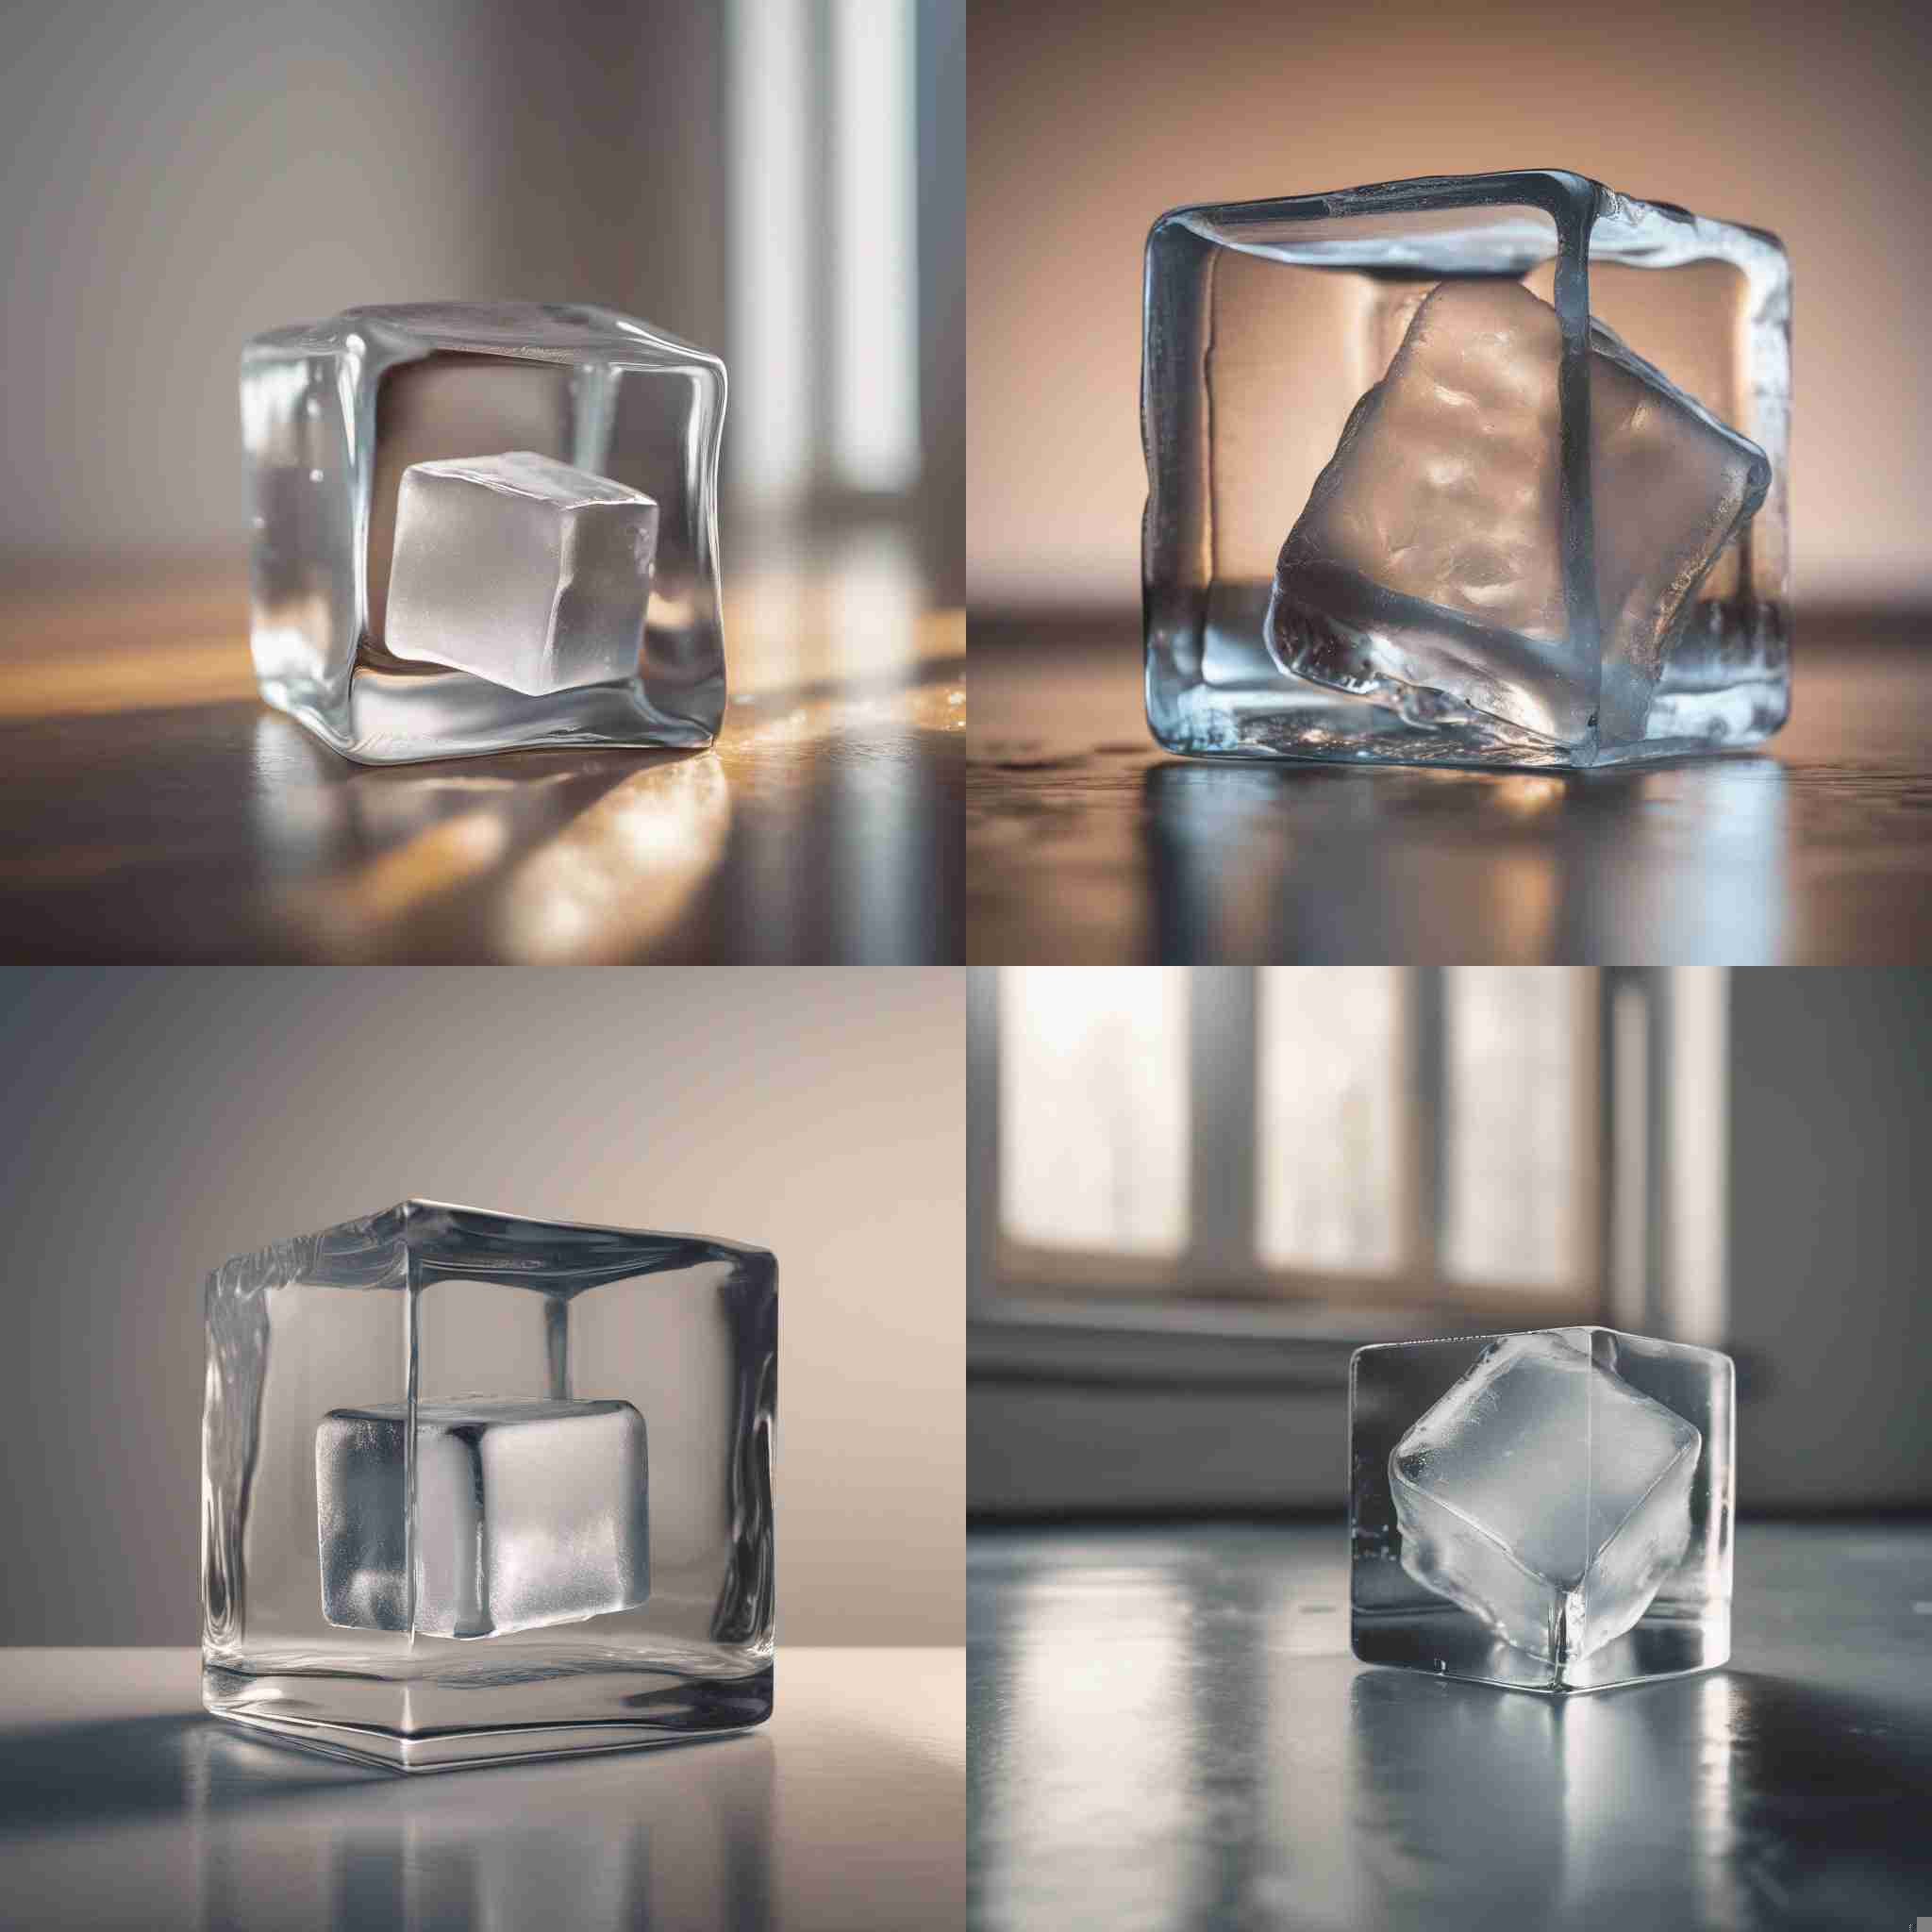 An ice cube in a warm room